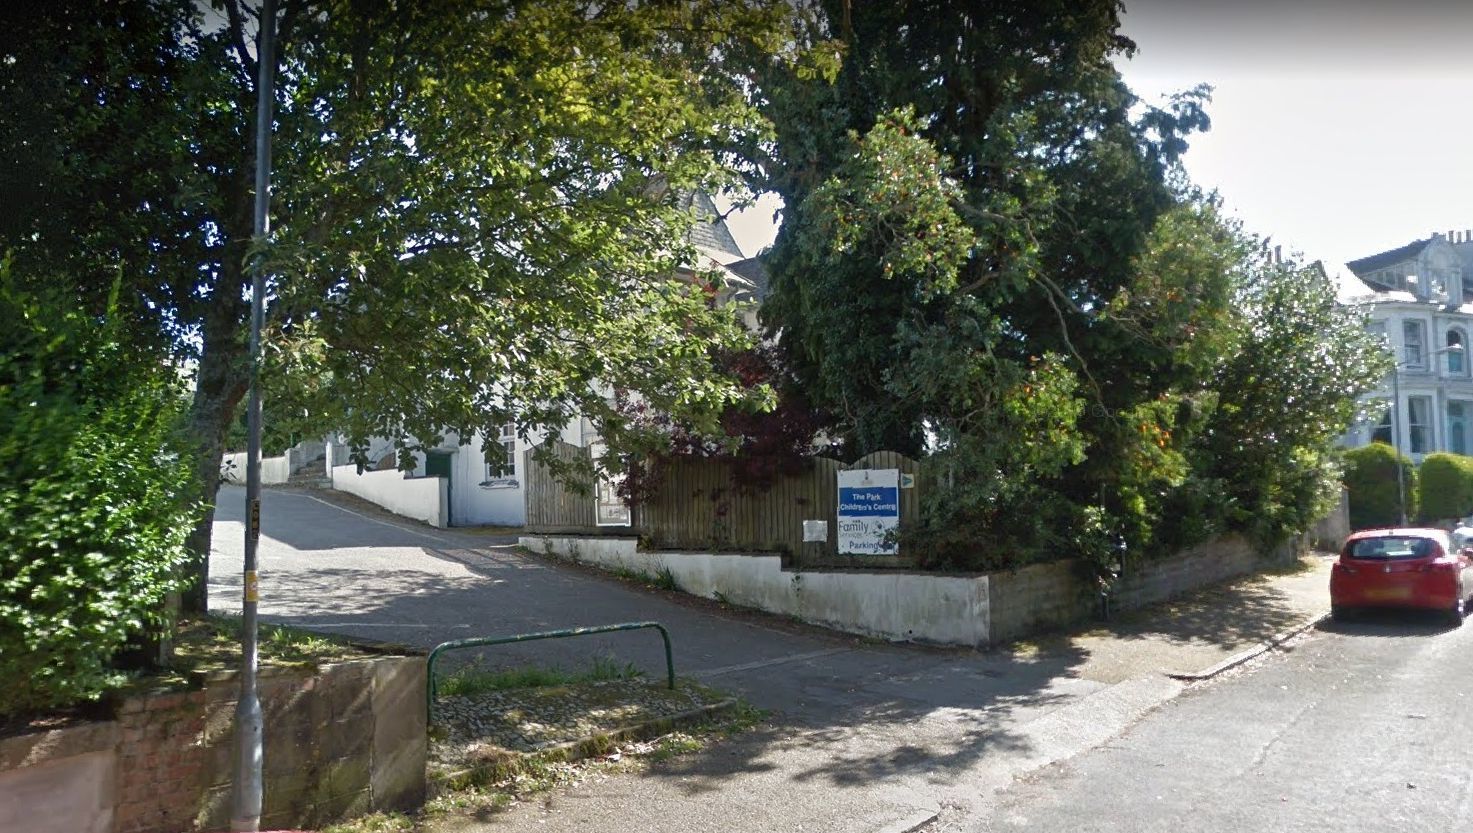 The Park Children's Centre in Falmouth is earmarked for sale by Cornwall Council